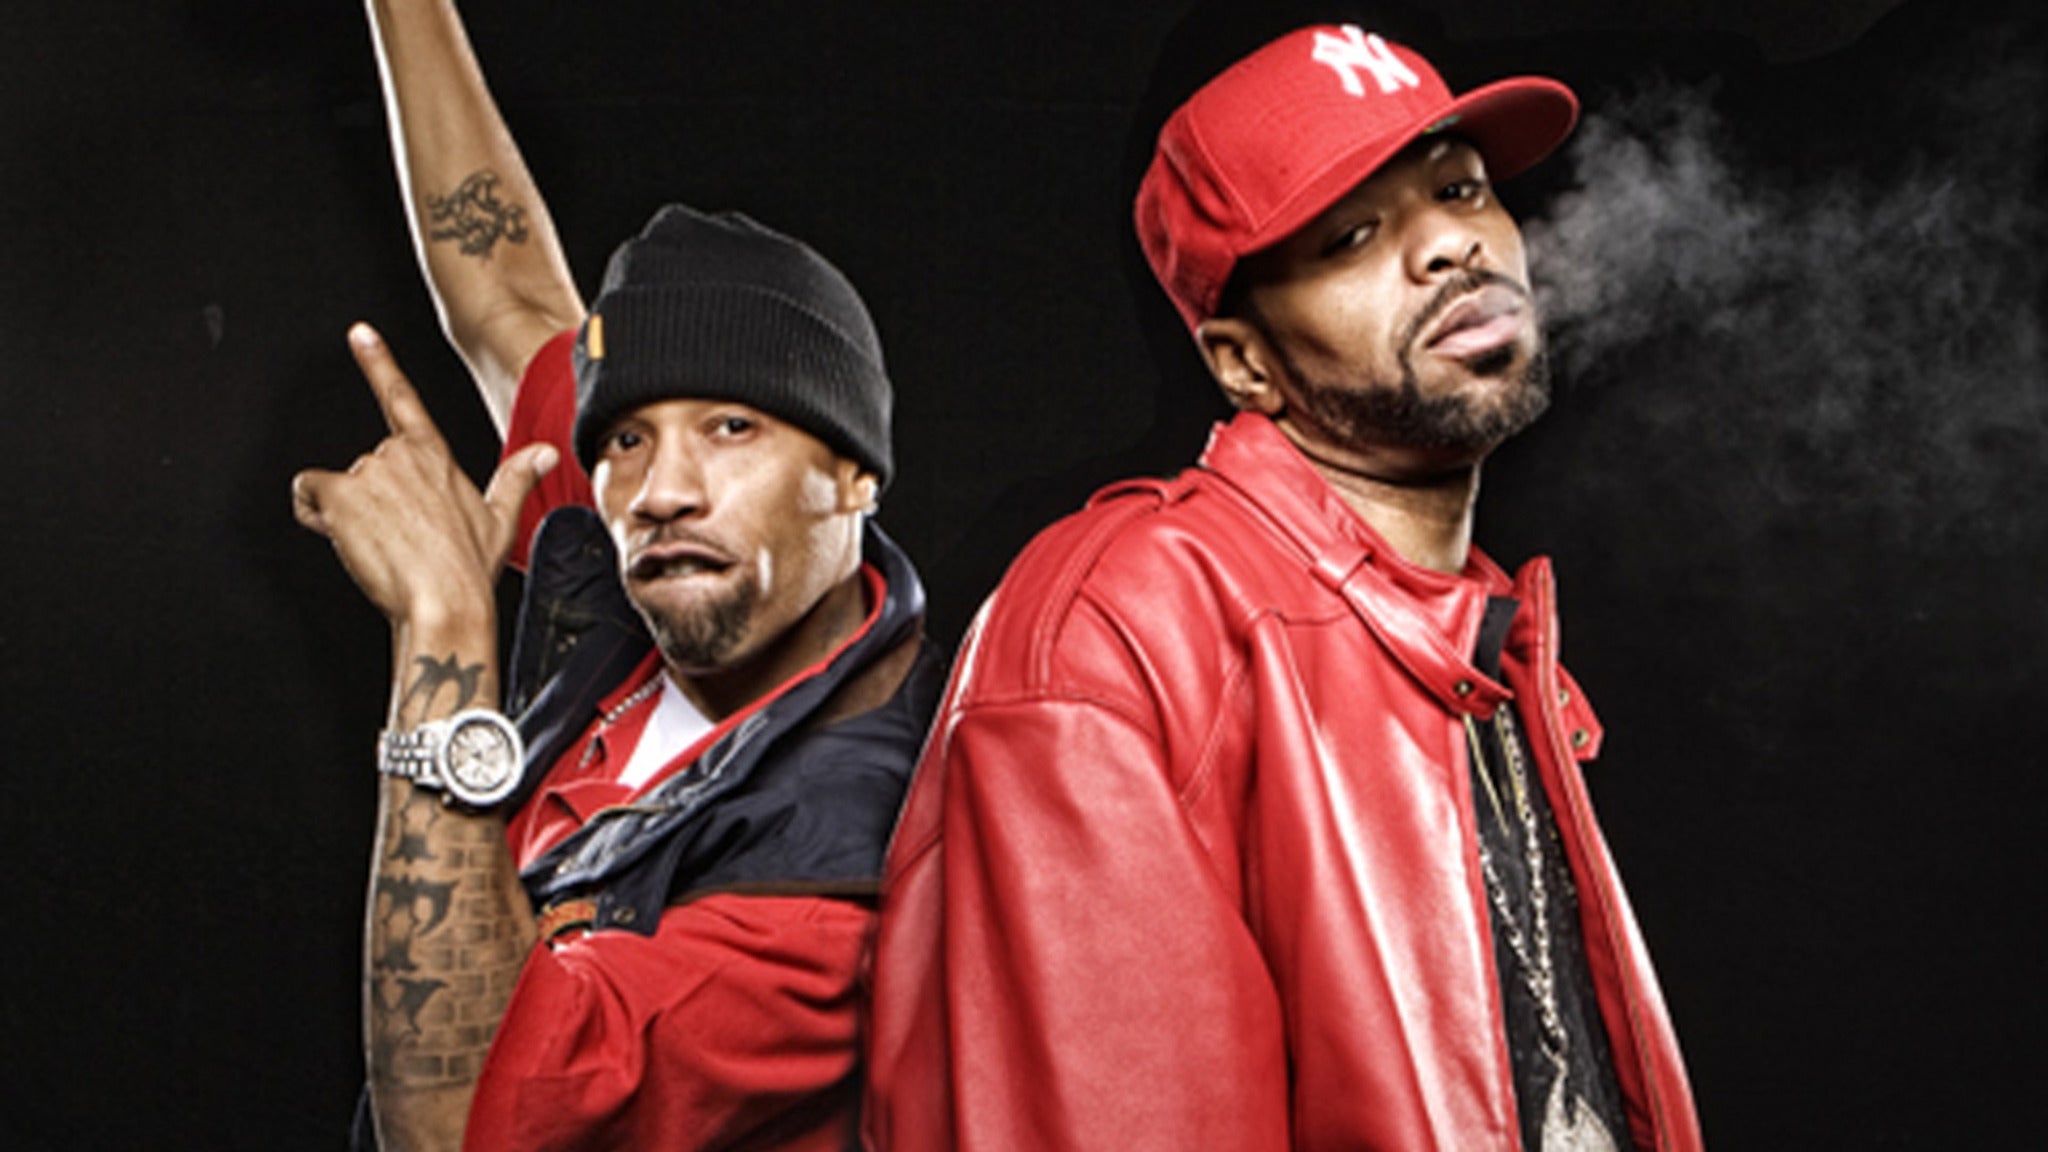 Method Man & Redman in New York City promo photo for American Express presale offer code